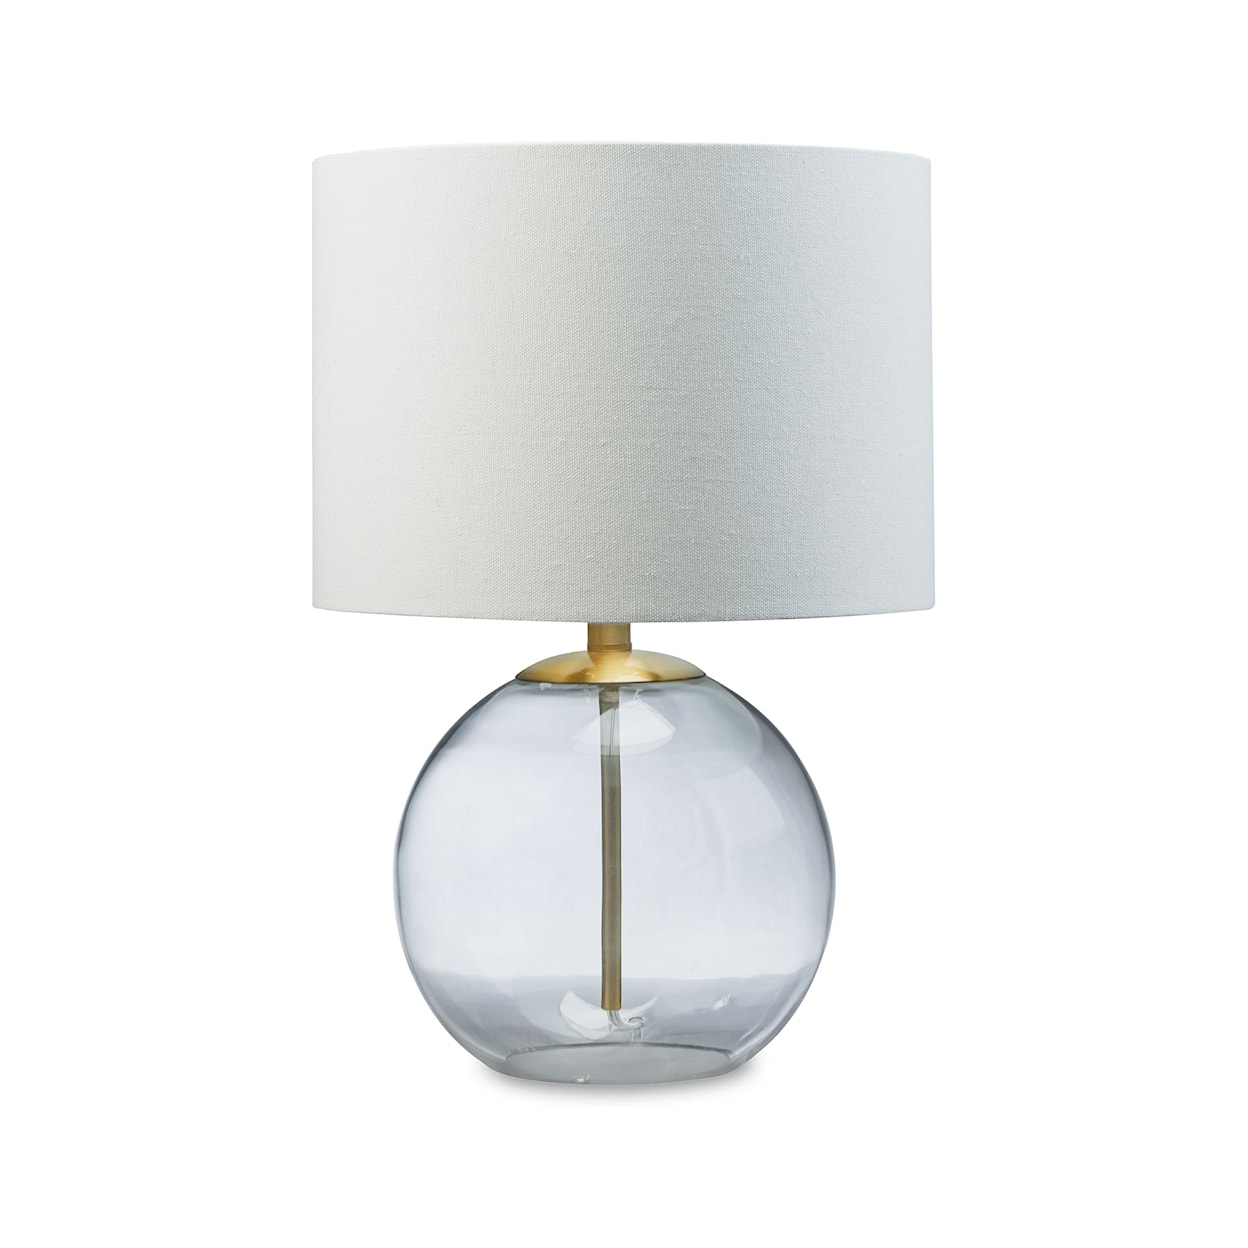 Signature Design by Ashley Samder Glass Table Lamp